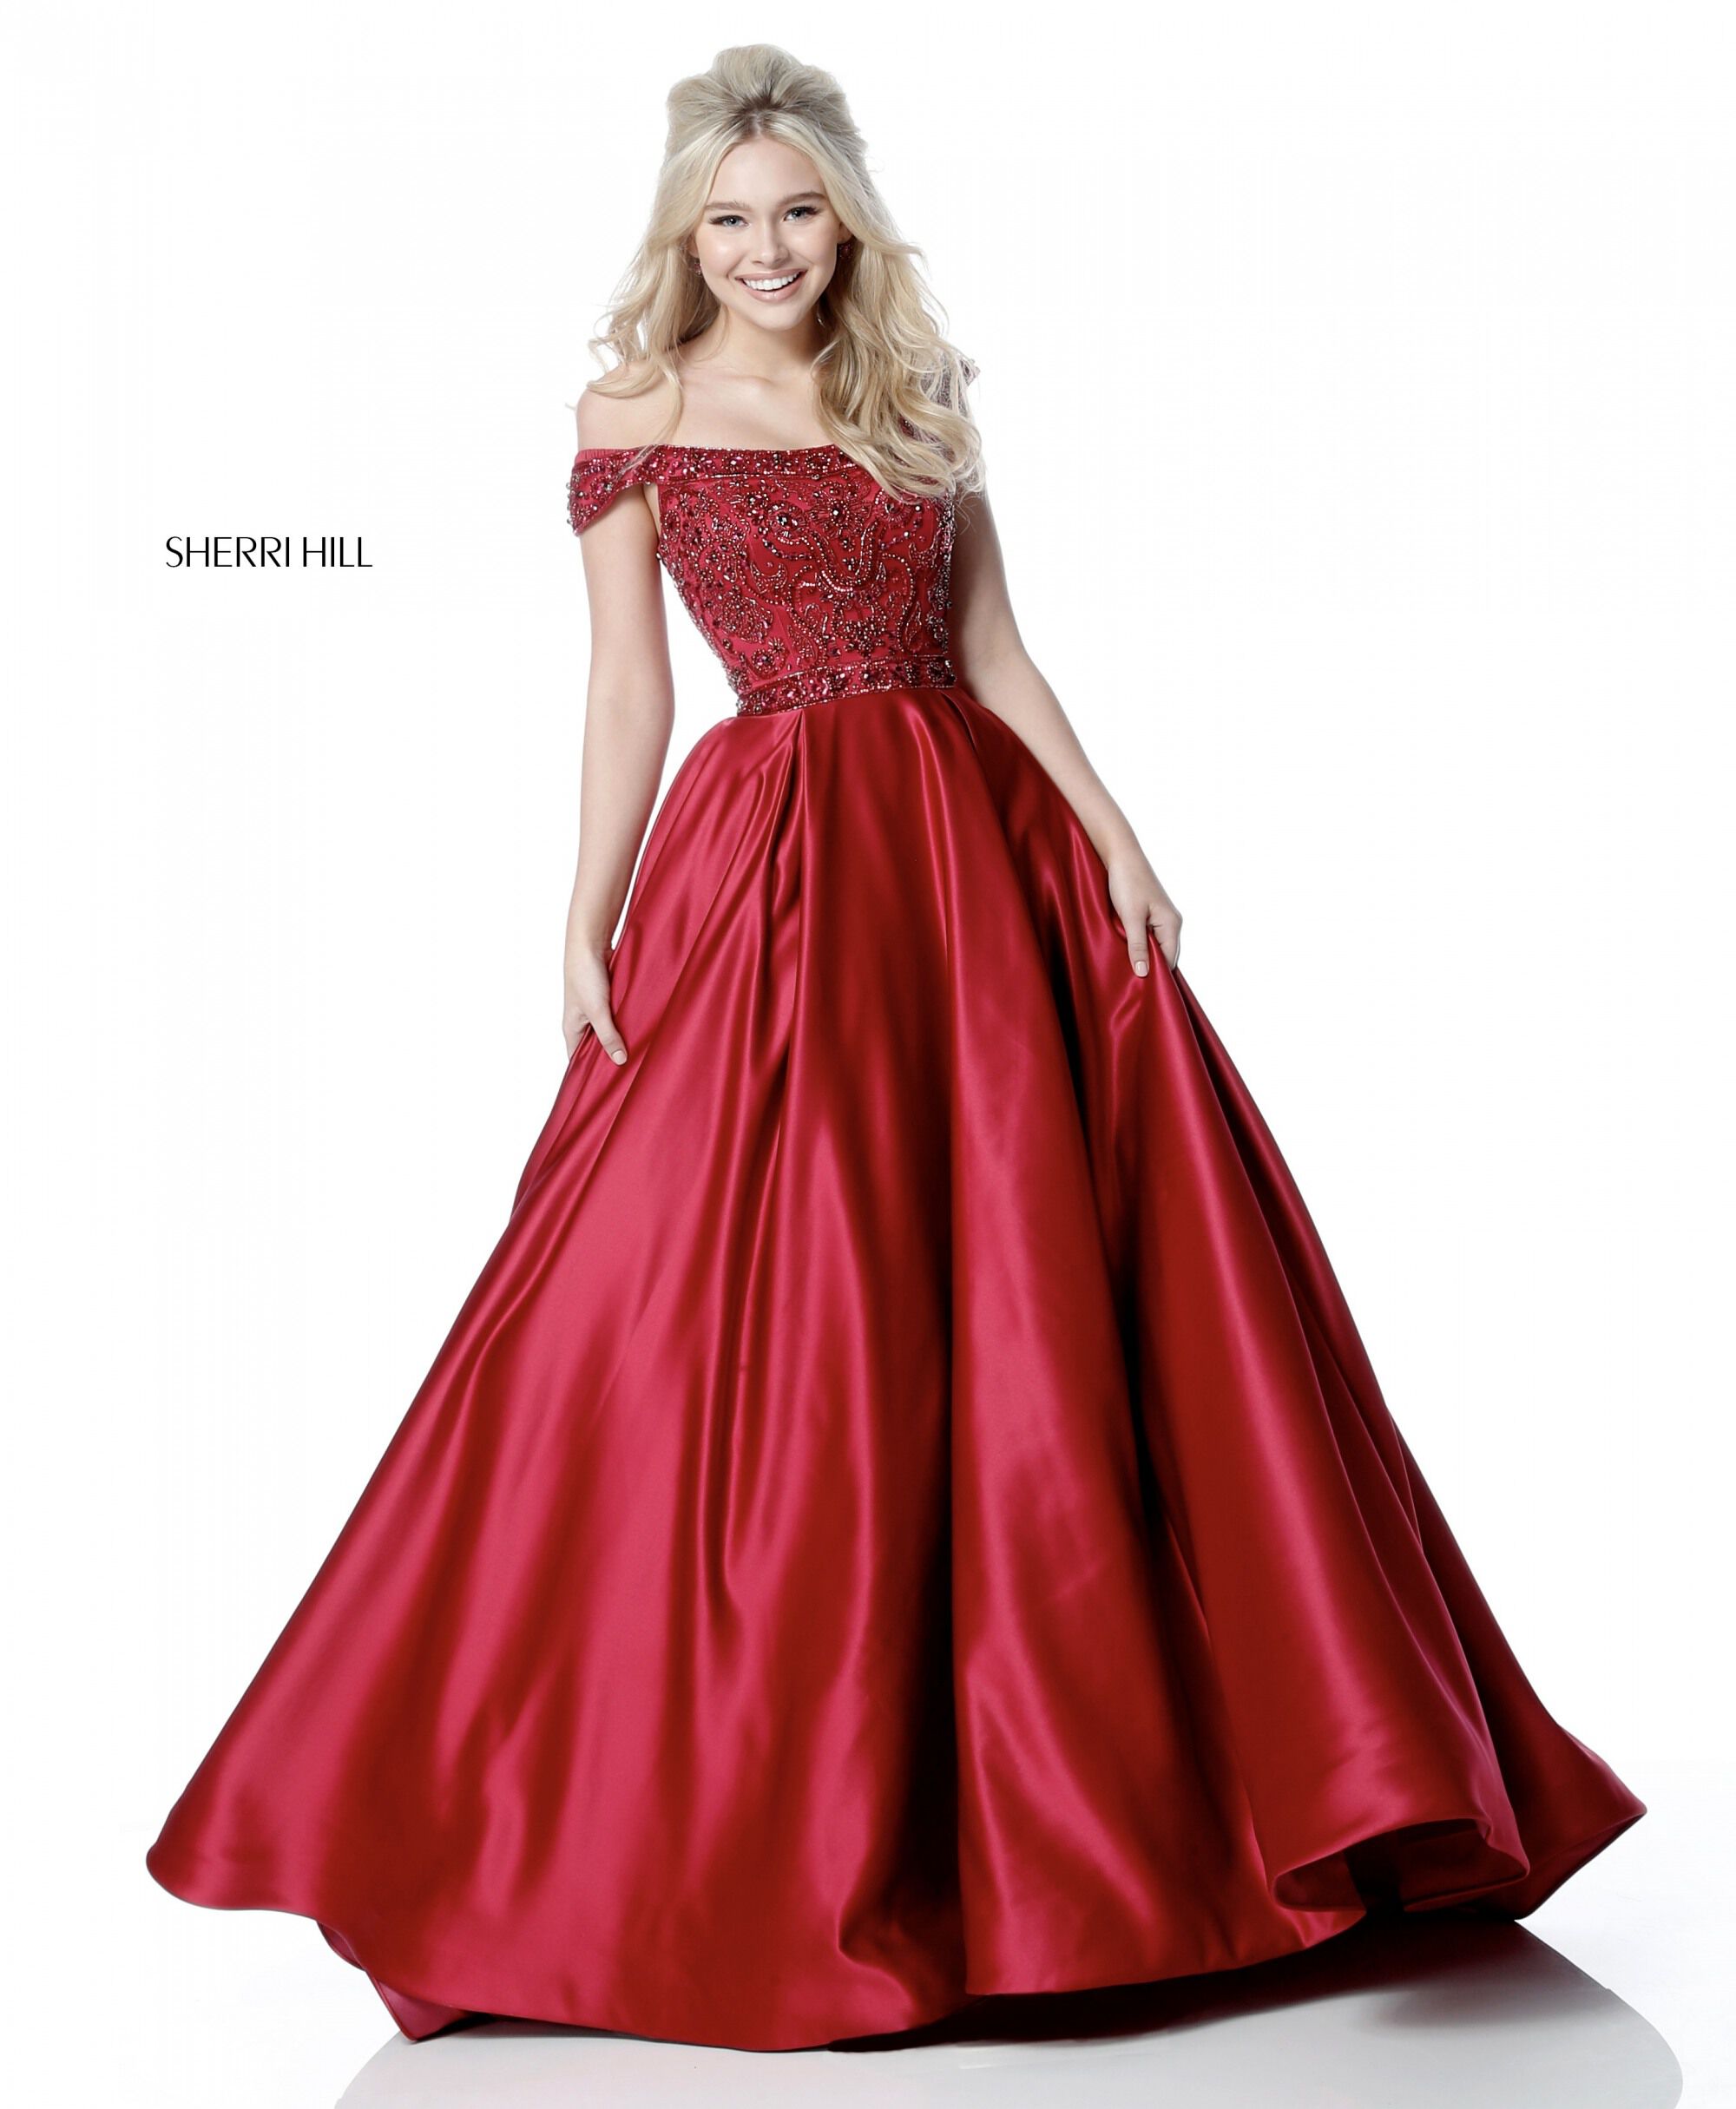 style № 51610 designed by SherriHill